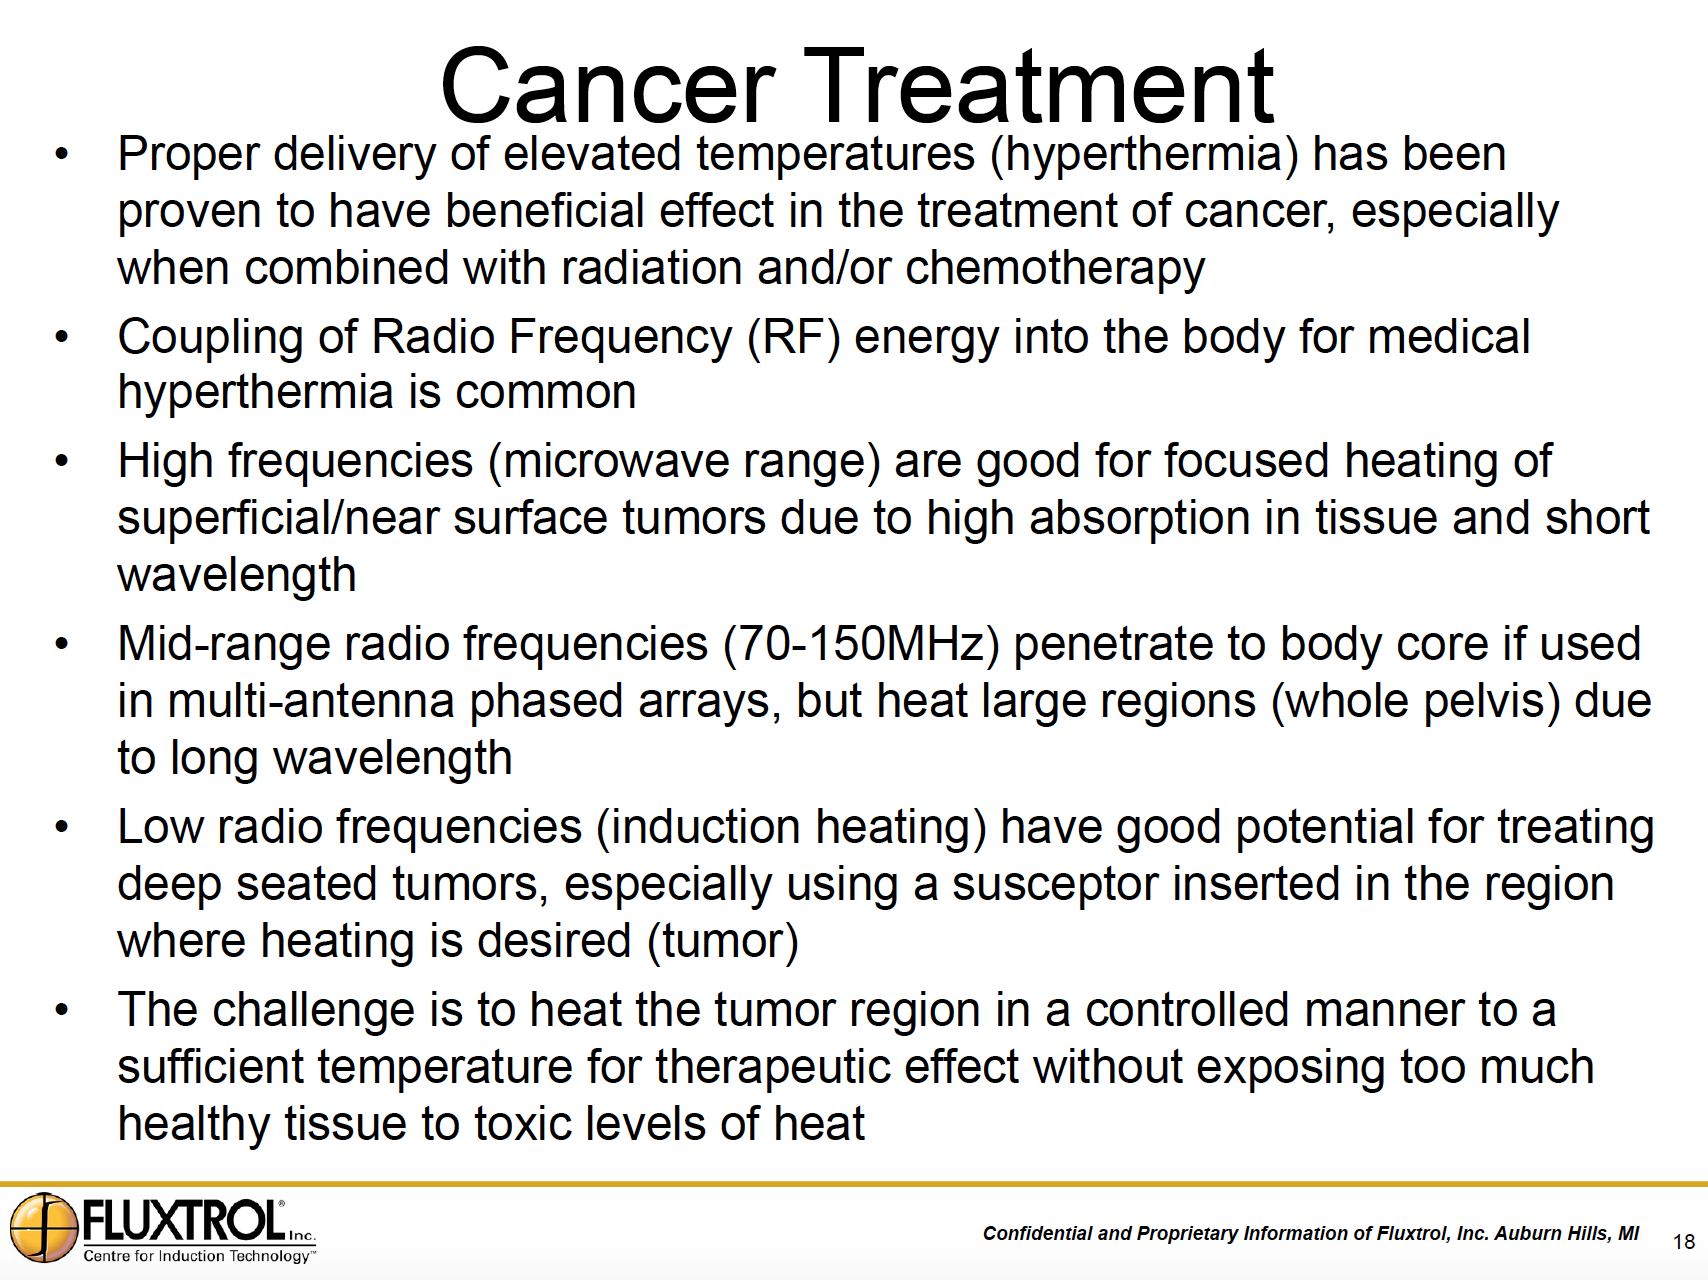 Fluxtrol | Applications of Induction Heating Enabling Advancement in Materials Science Figure 17 - Cancer Treatment